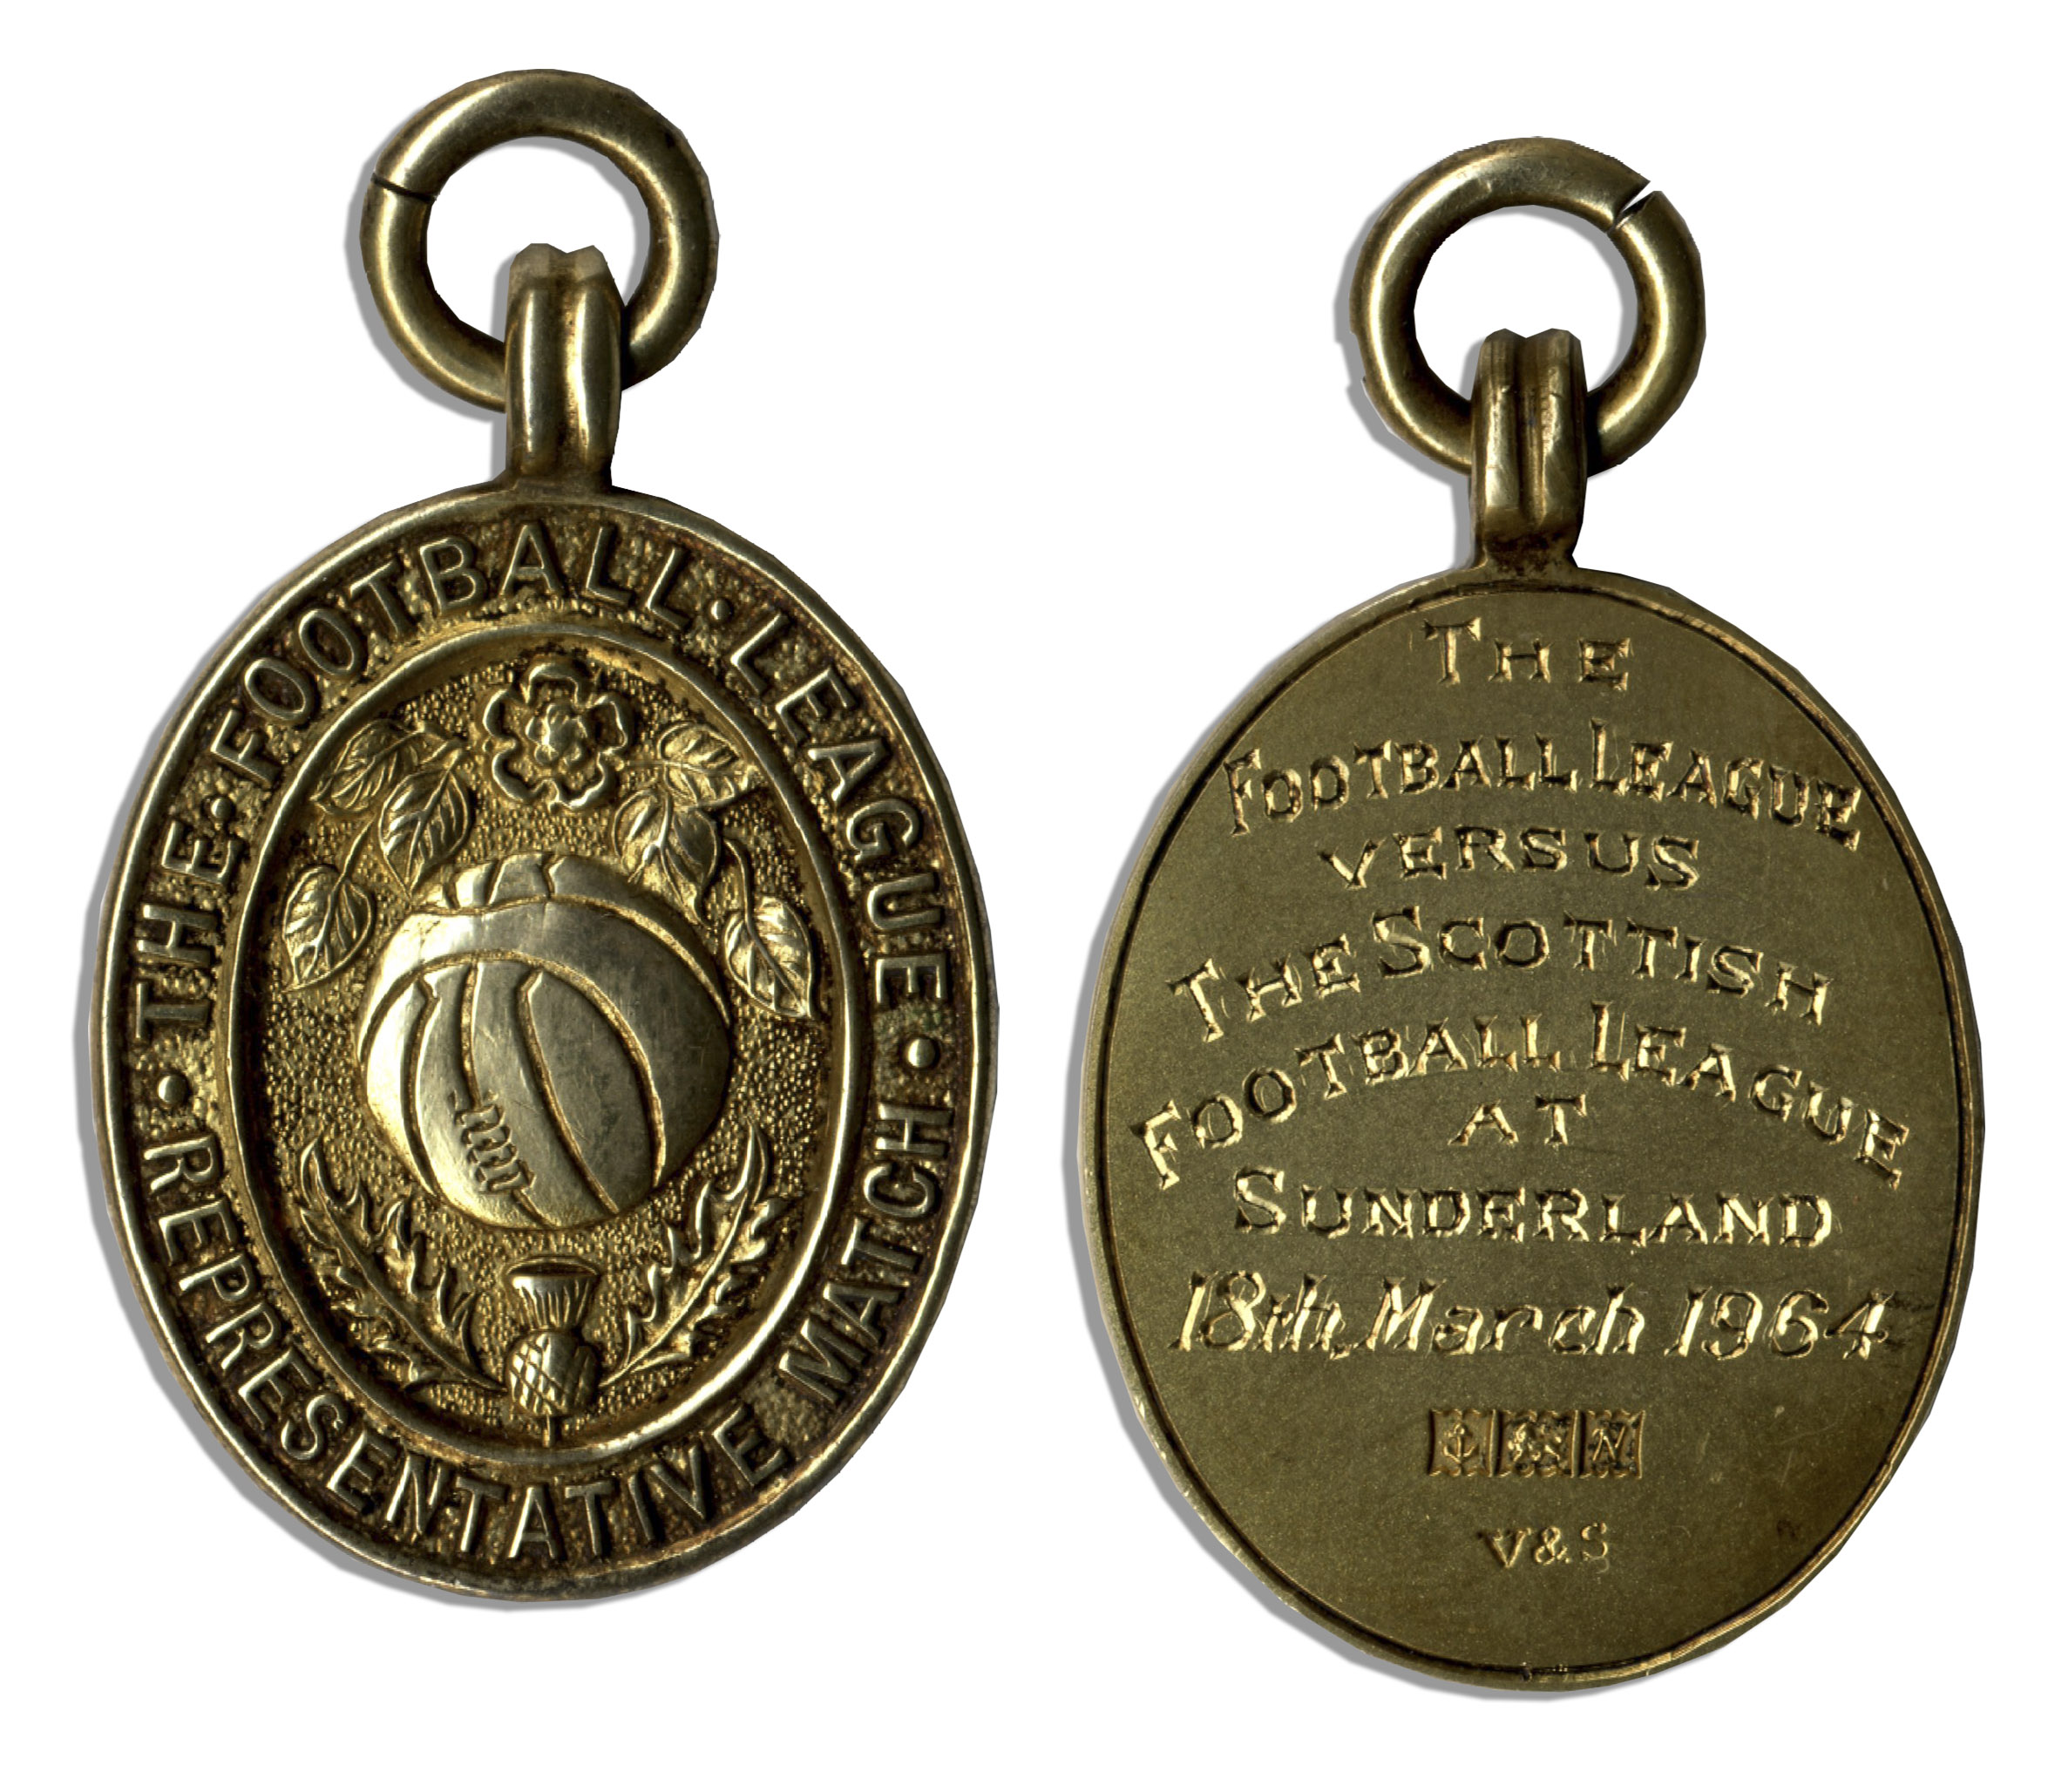 Football League vs. Scottish Football League Silver-Gilt Medal From 1964 Medal from the 1964 match